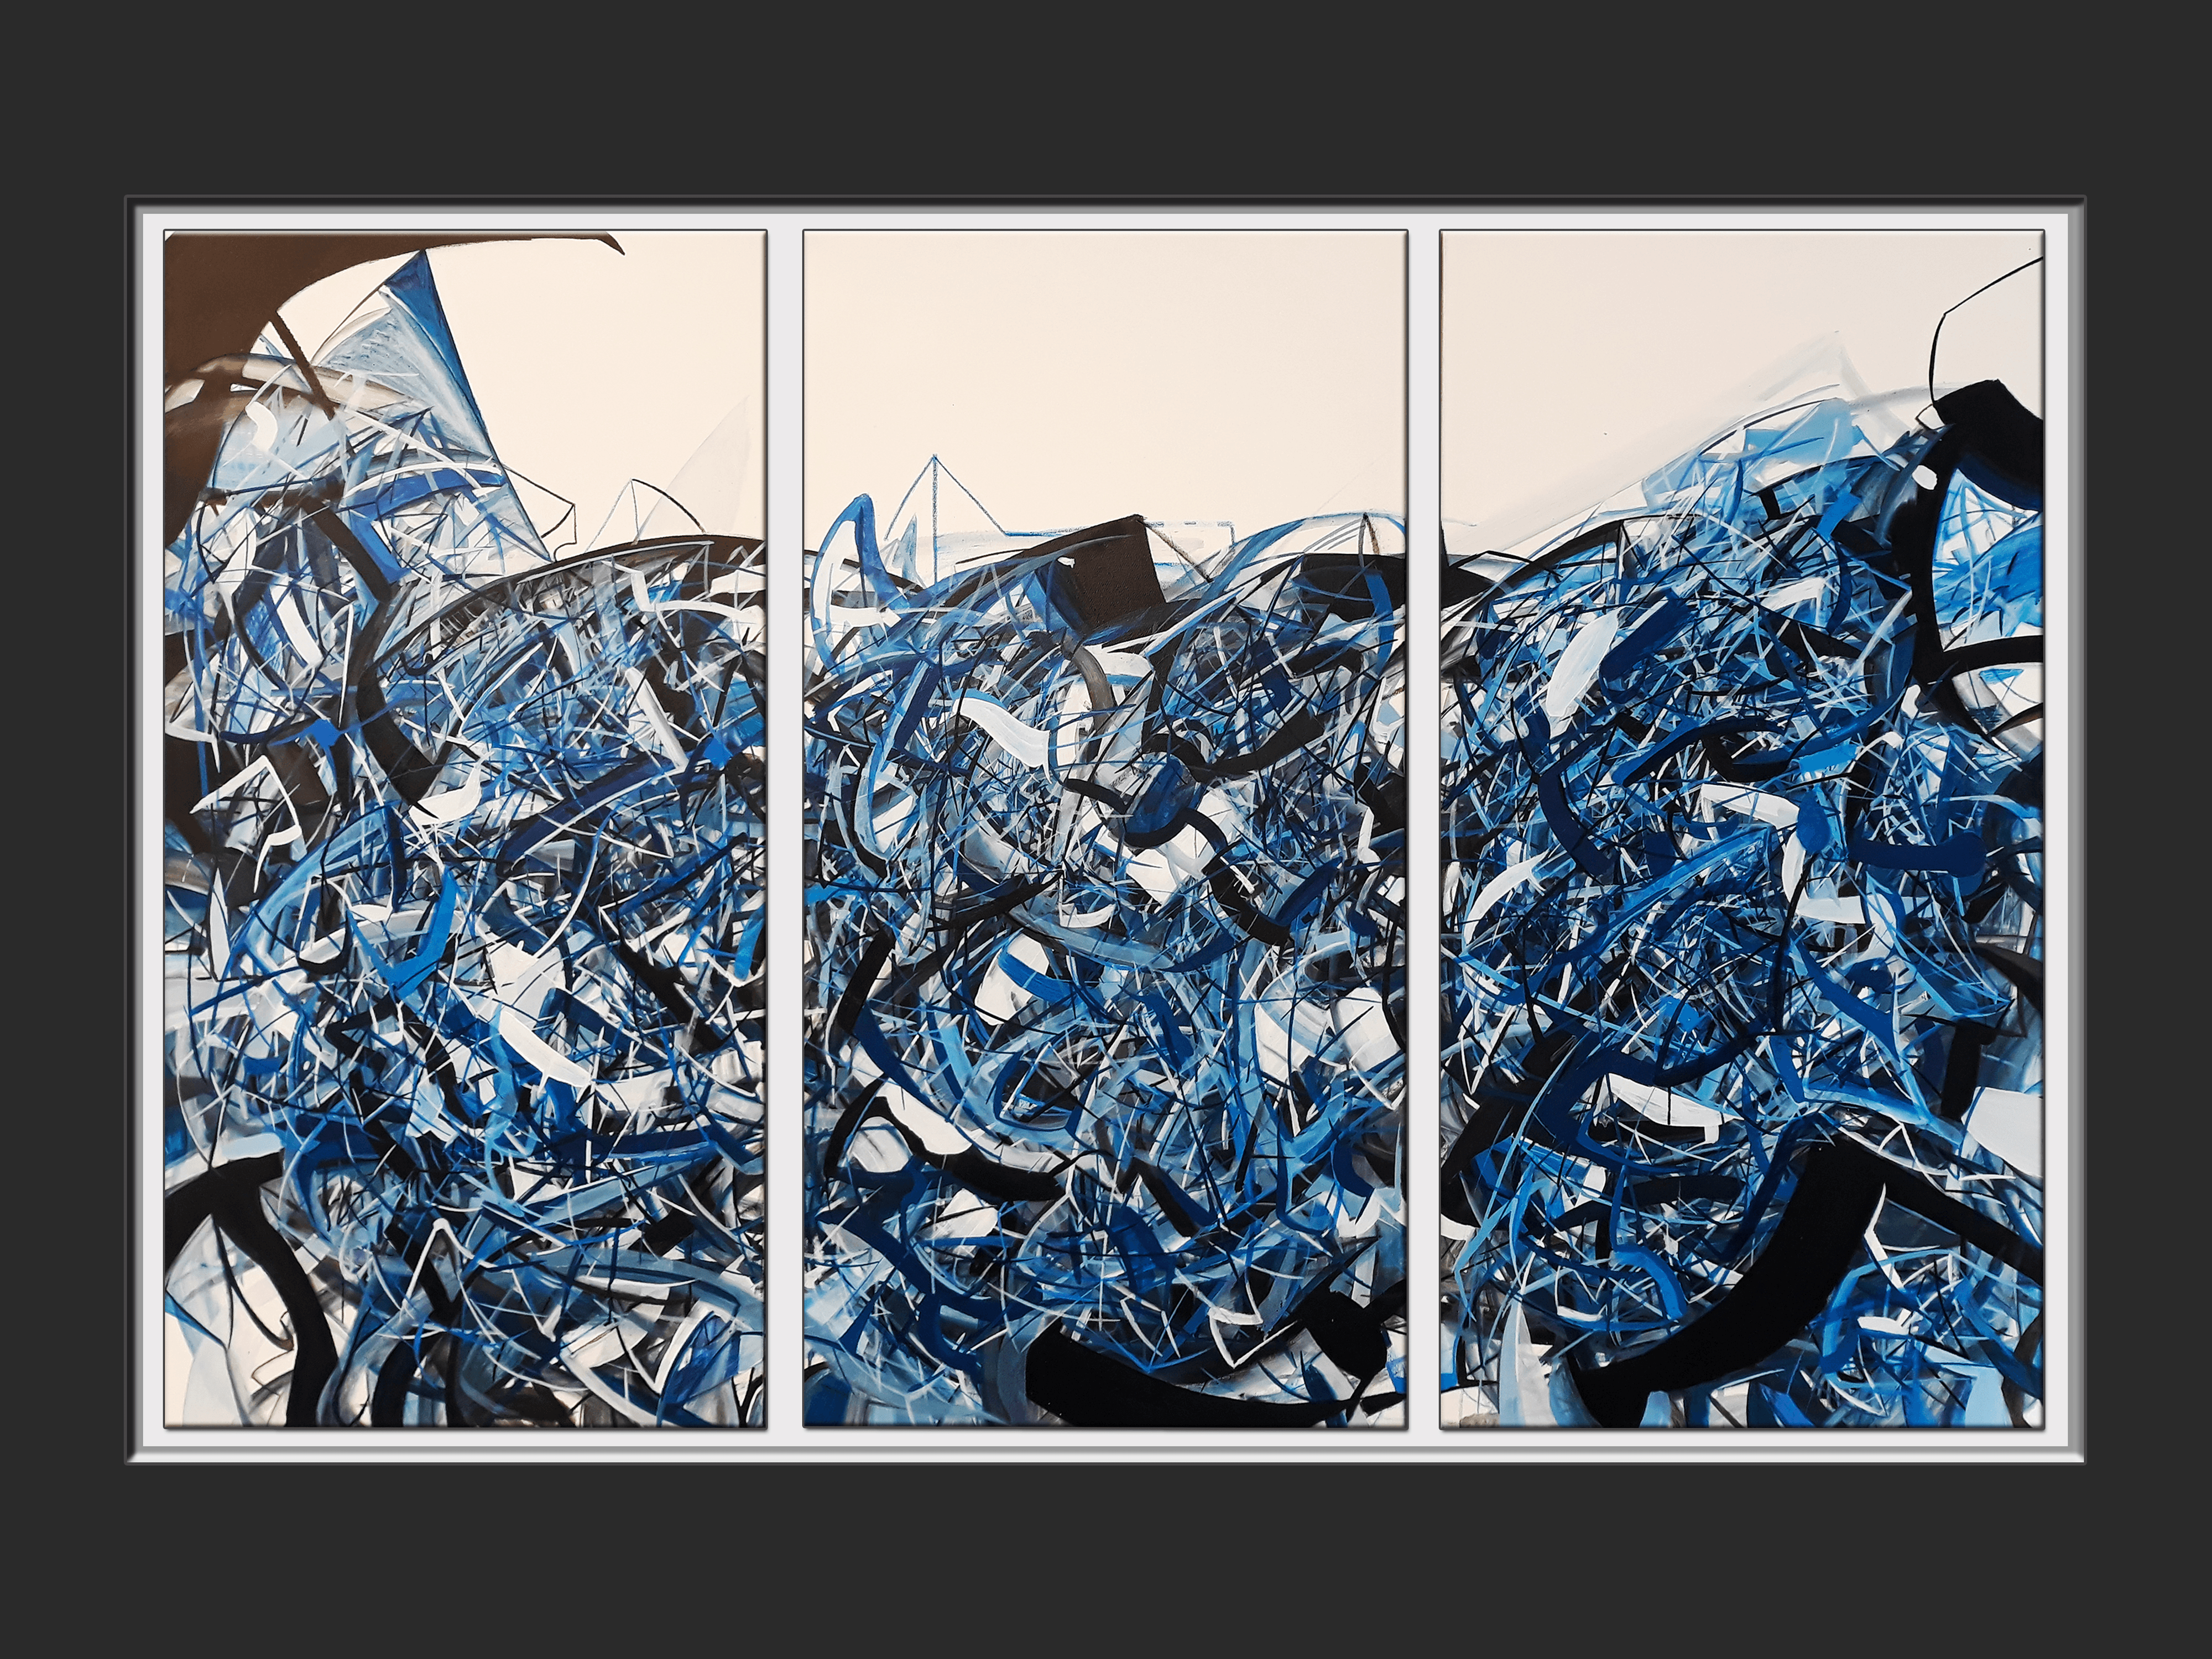 Abstract oil painting on triptych canvas "Broken Moonlight" by Rafaël